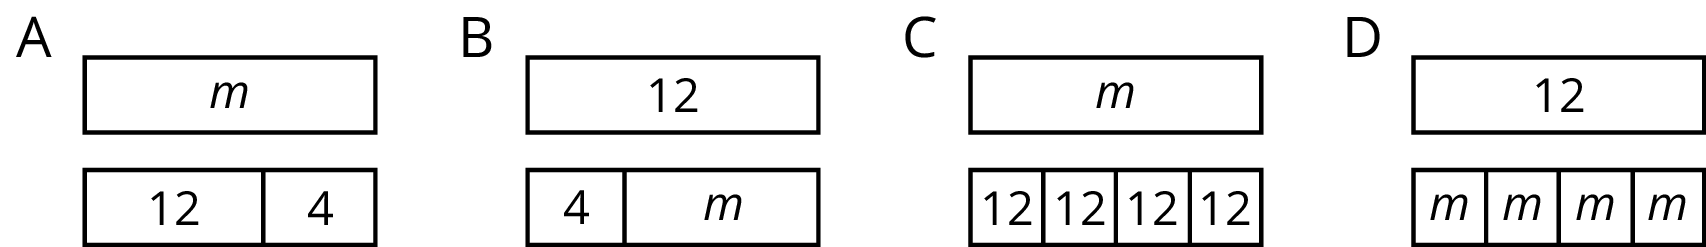 Four tape diagrams labeled A, B, C, and D. Tape diagram A has 2 bars of equal length. The top bar is labeled m. The bottom bar is partitioned into 2 parts labeled 12 and 4. Tape diagram B has 2 bars of equal length. The top bar is labeled 12. The bottom bar is partitioned into 2 parts labeled 4 and m. Tape diagram C has 2 bars of equal length. The top bar is labeled m. The bottom bar is partitioned into 4 parts labeled 12, 12, 12, and 12. Tape diagram D has 2 bars of equal length. The top bar is labeled 12. The bottom bar is partitioned into 4 parts labeled m, m, m, and m.